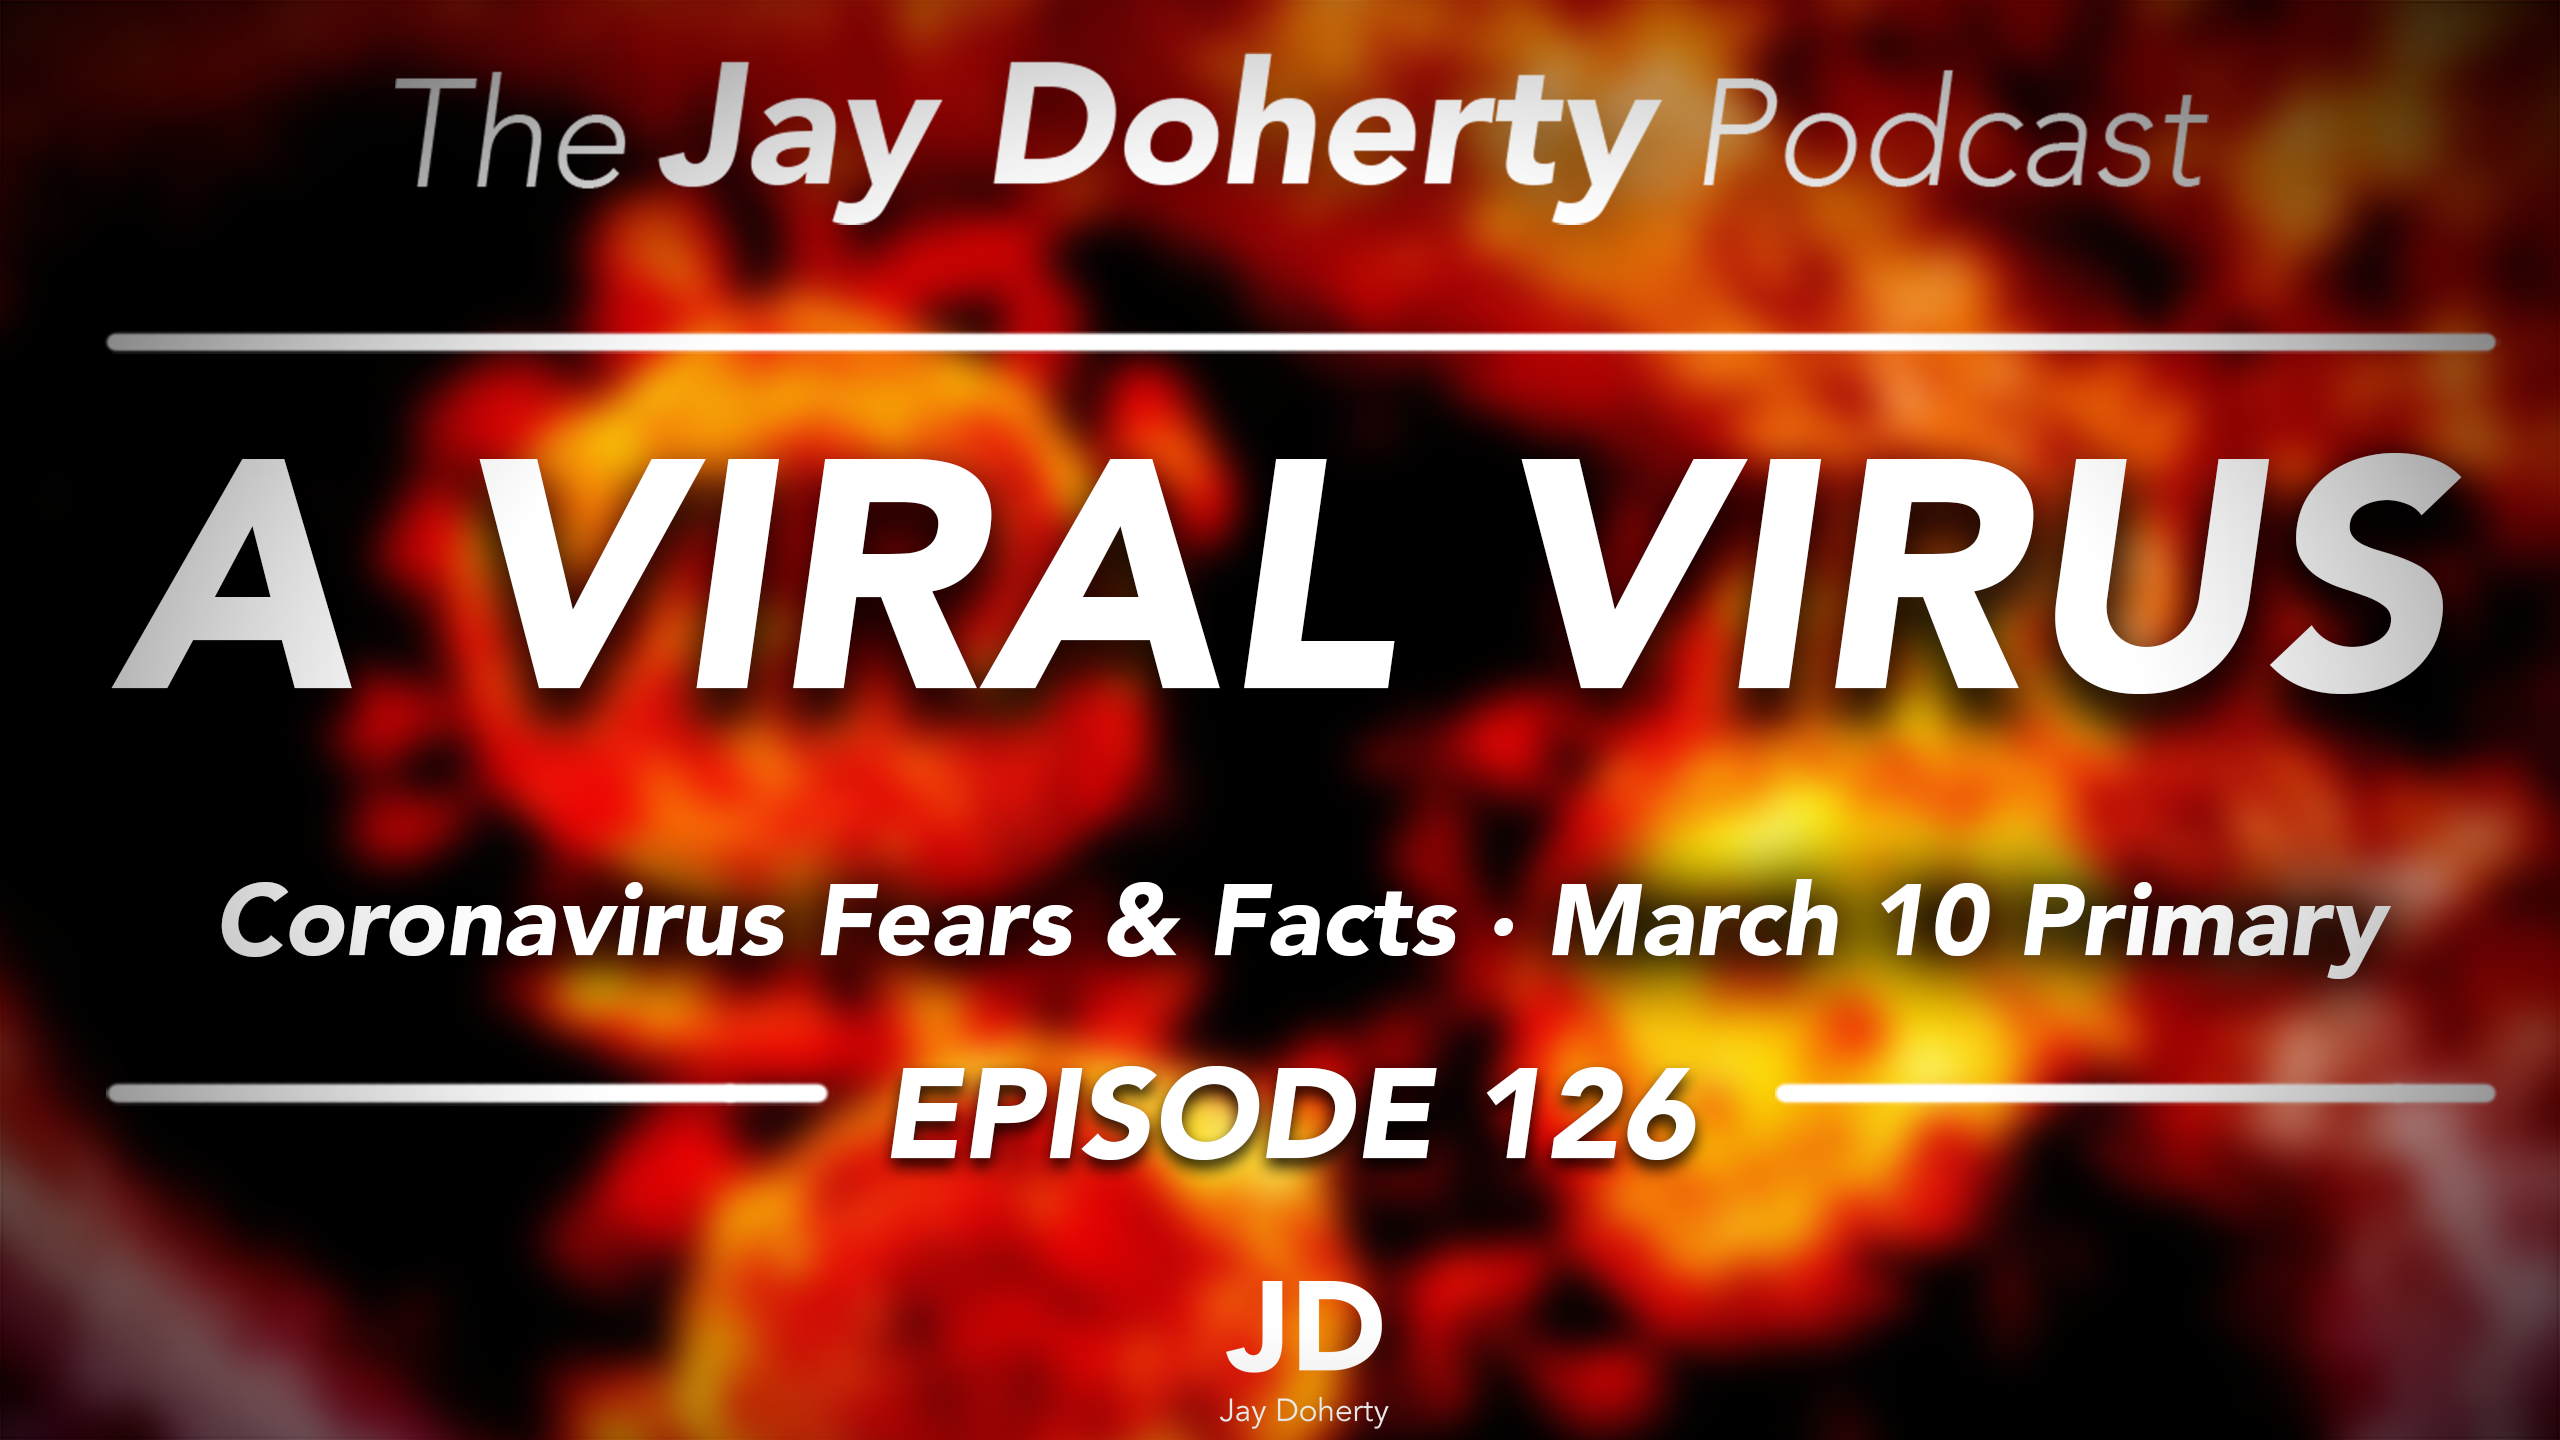 Ep. 126 – A Viral Virus | Coronavirus Fears & Facts, March 10 Primary